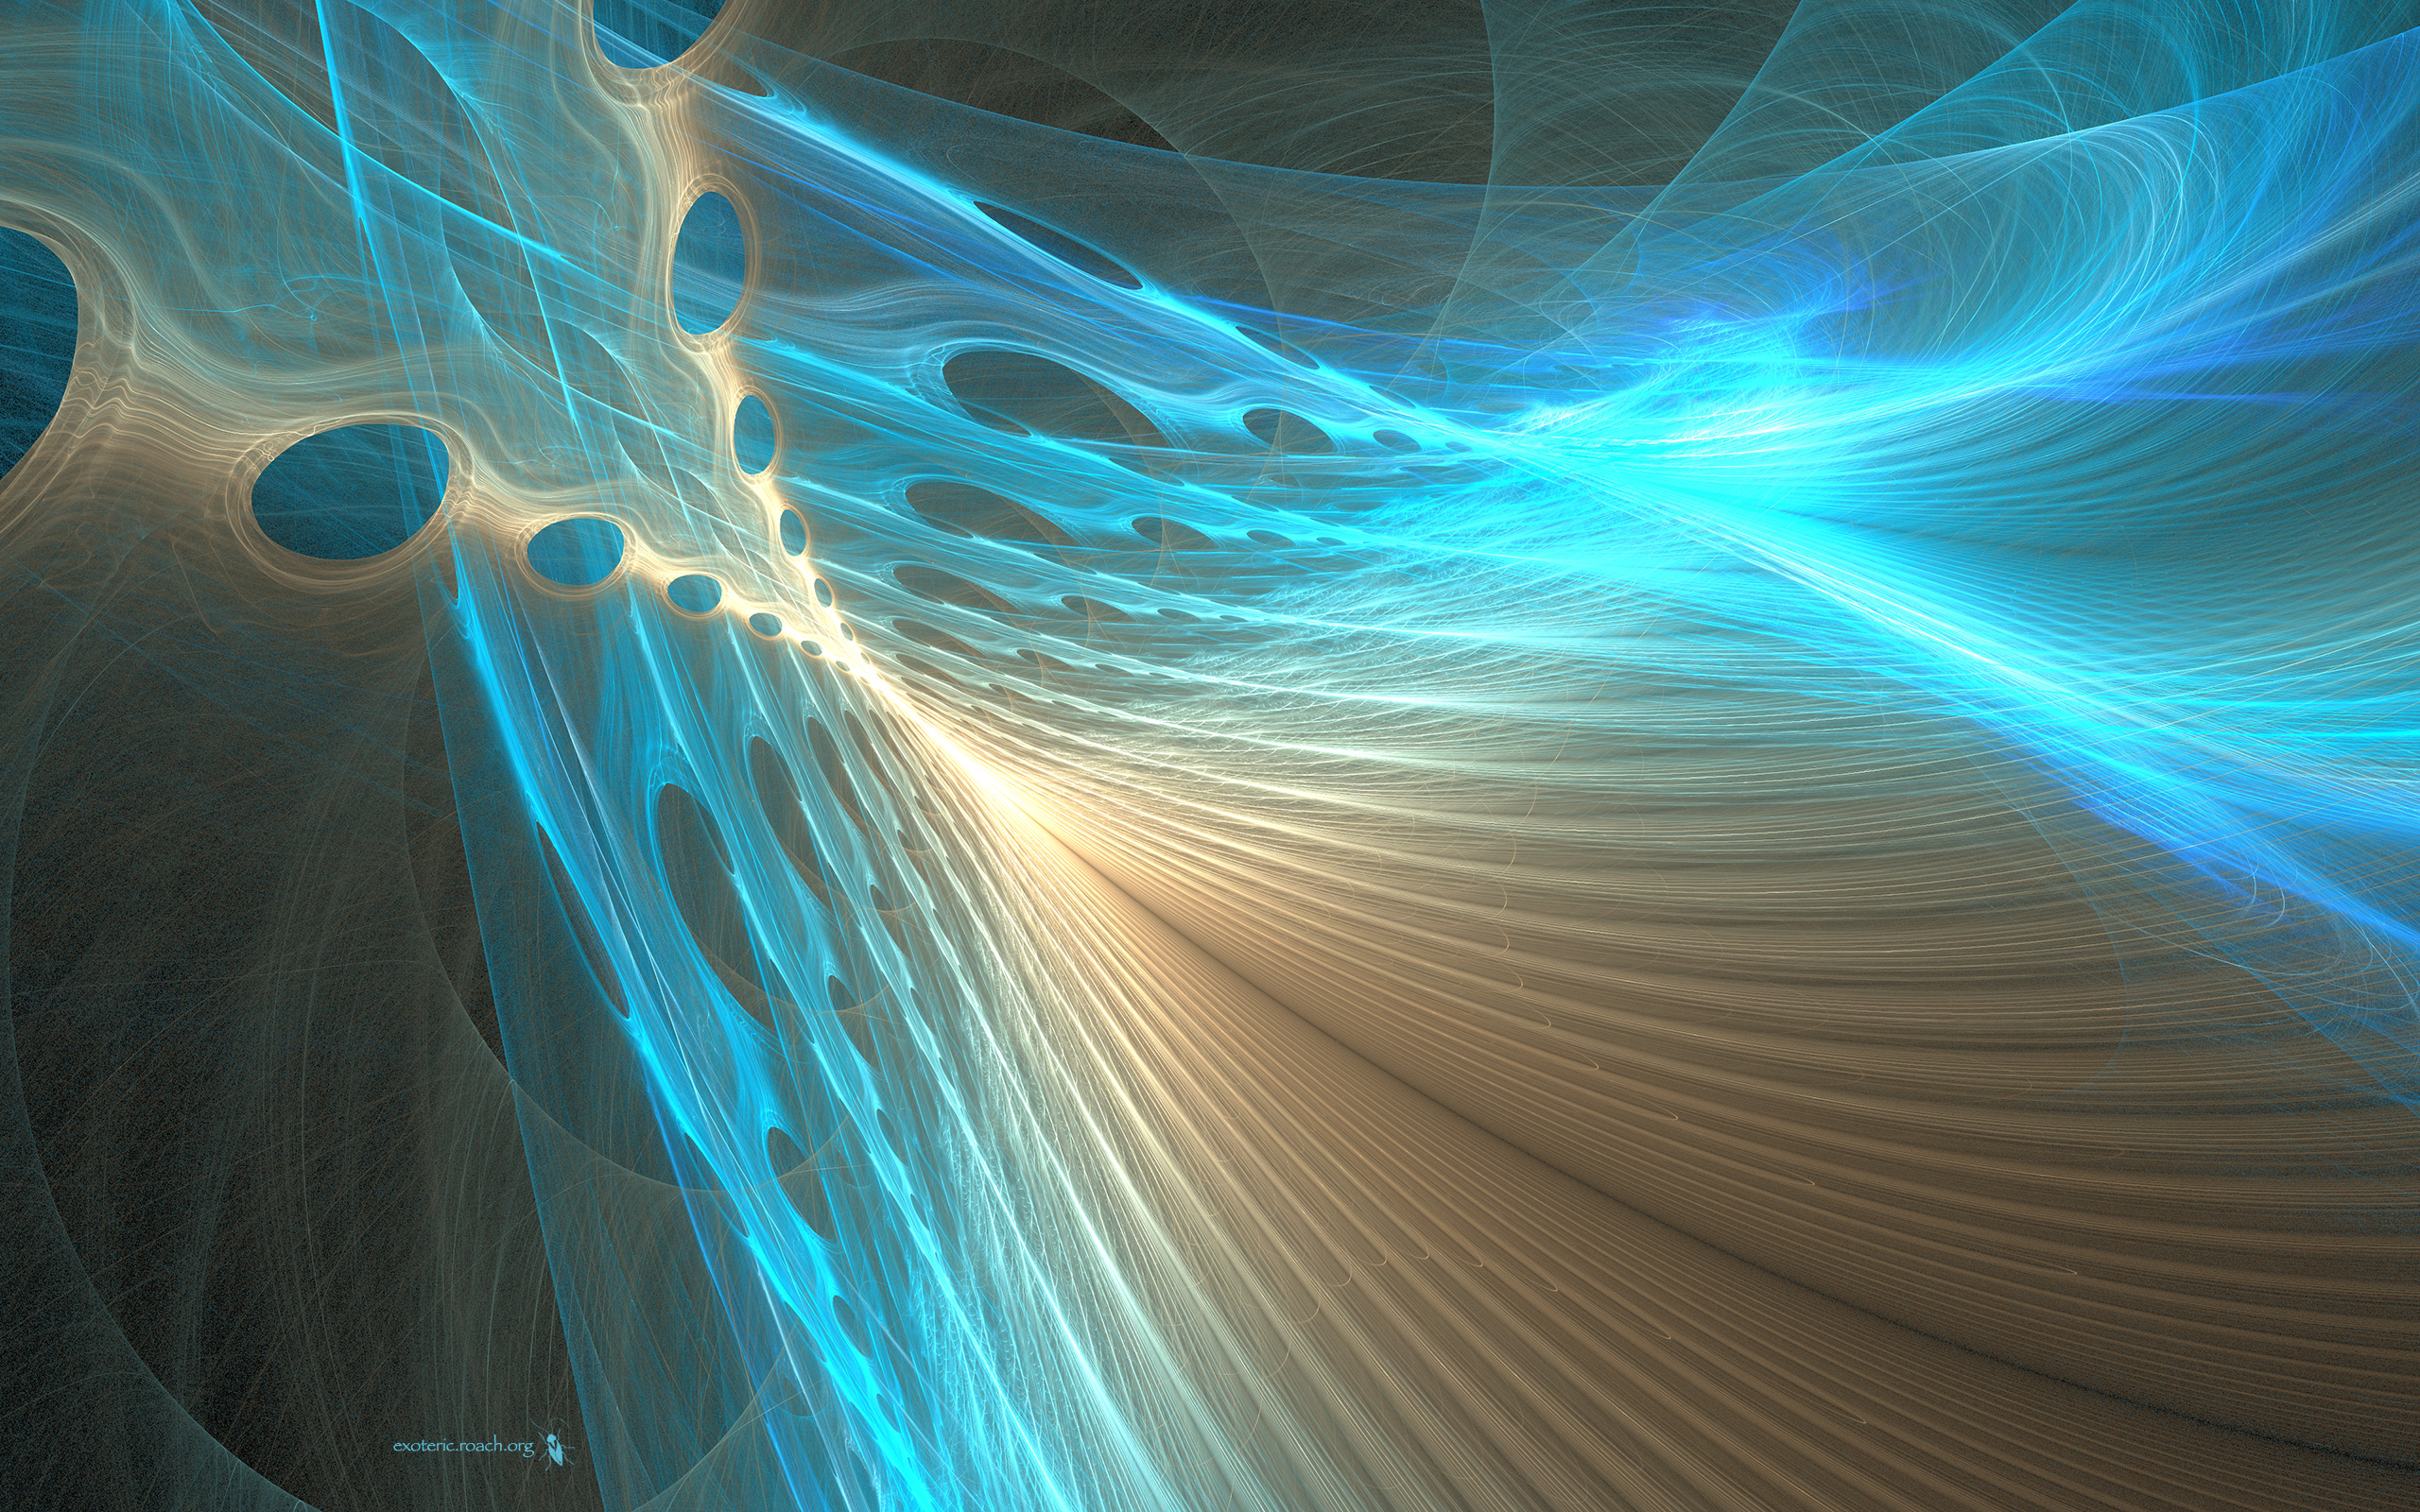 Best Abstract Full HD Wallpapers 2560X1600 - Fraktale HD Abstract HQ00 1 7.jpg